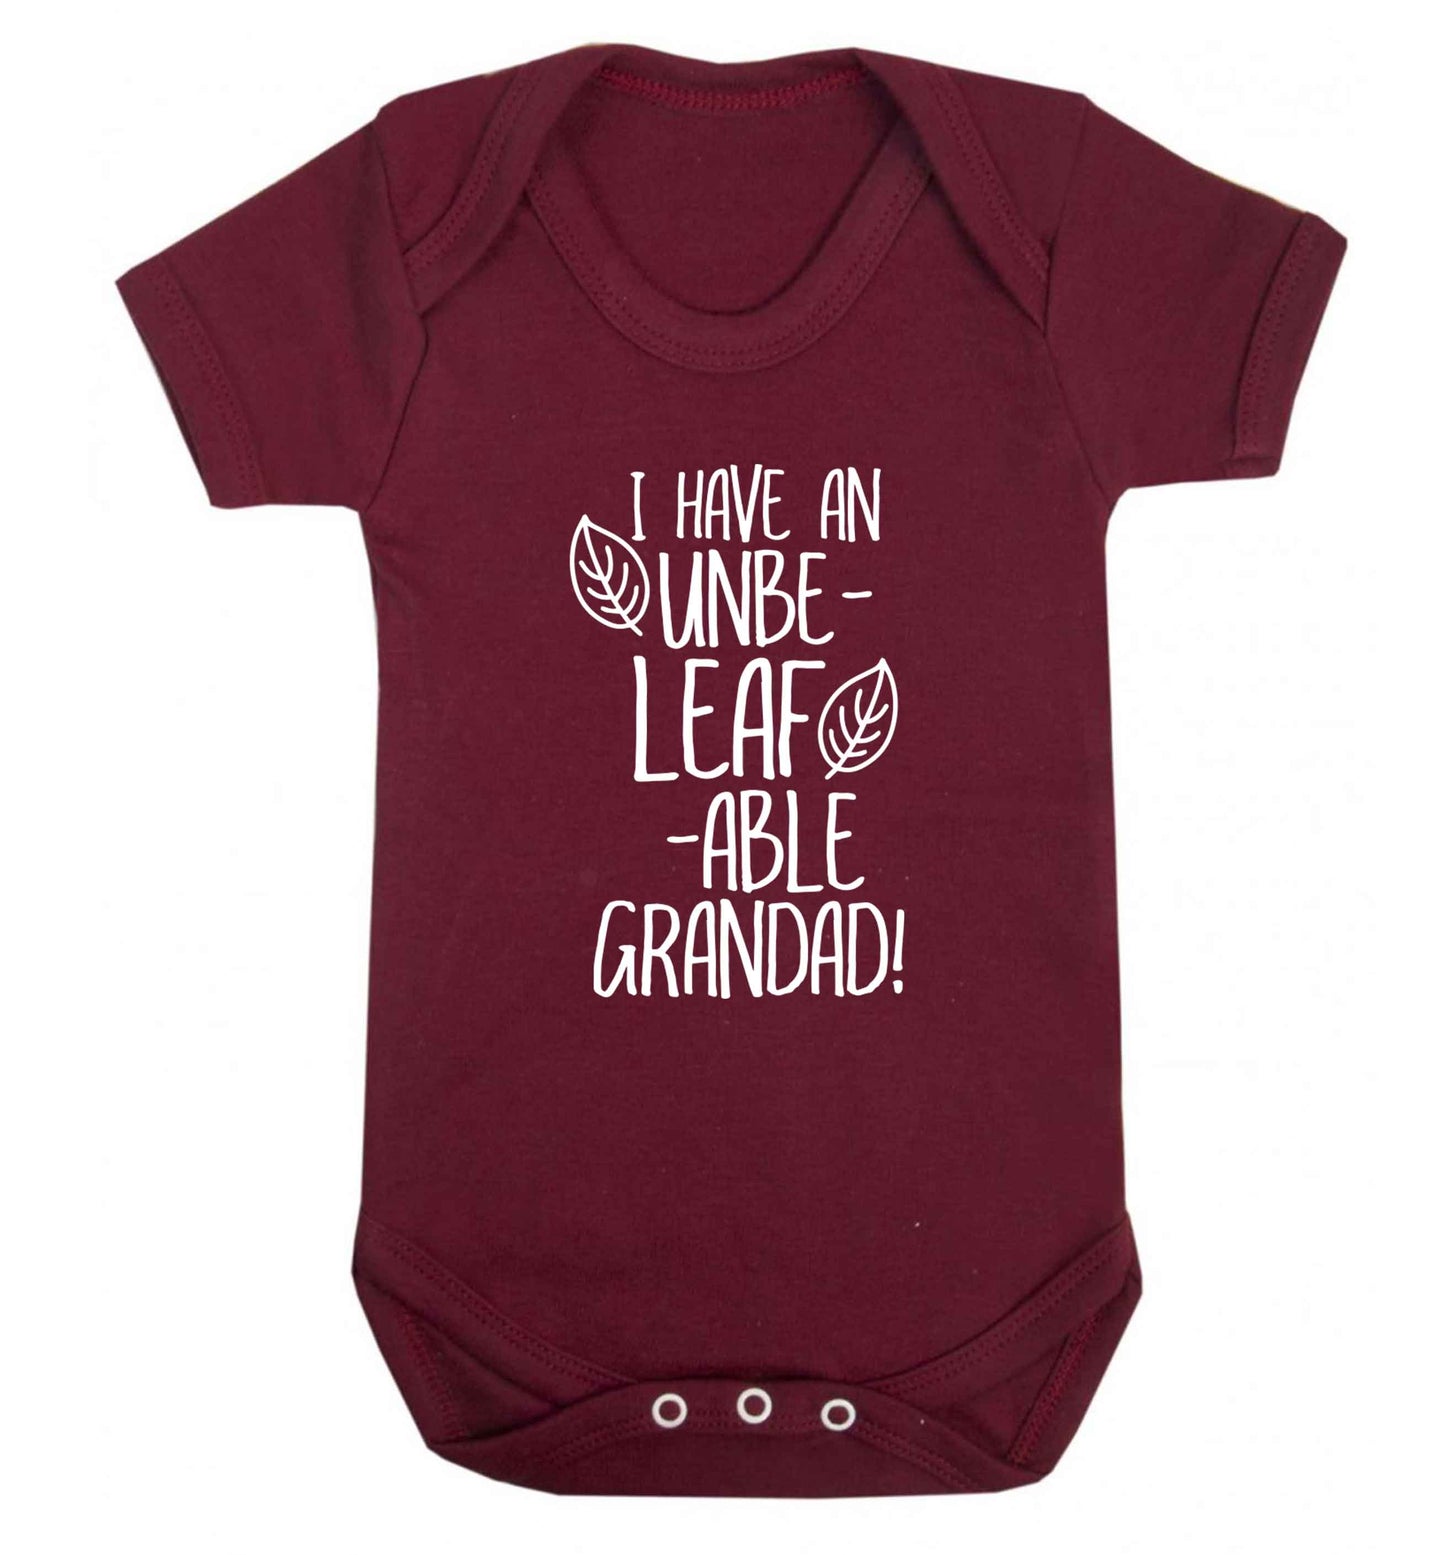 I have an unbe-leaf-able grandad Baby Vest maroon 18-24 months